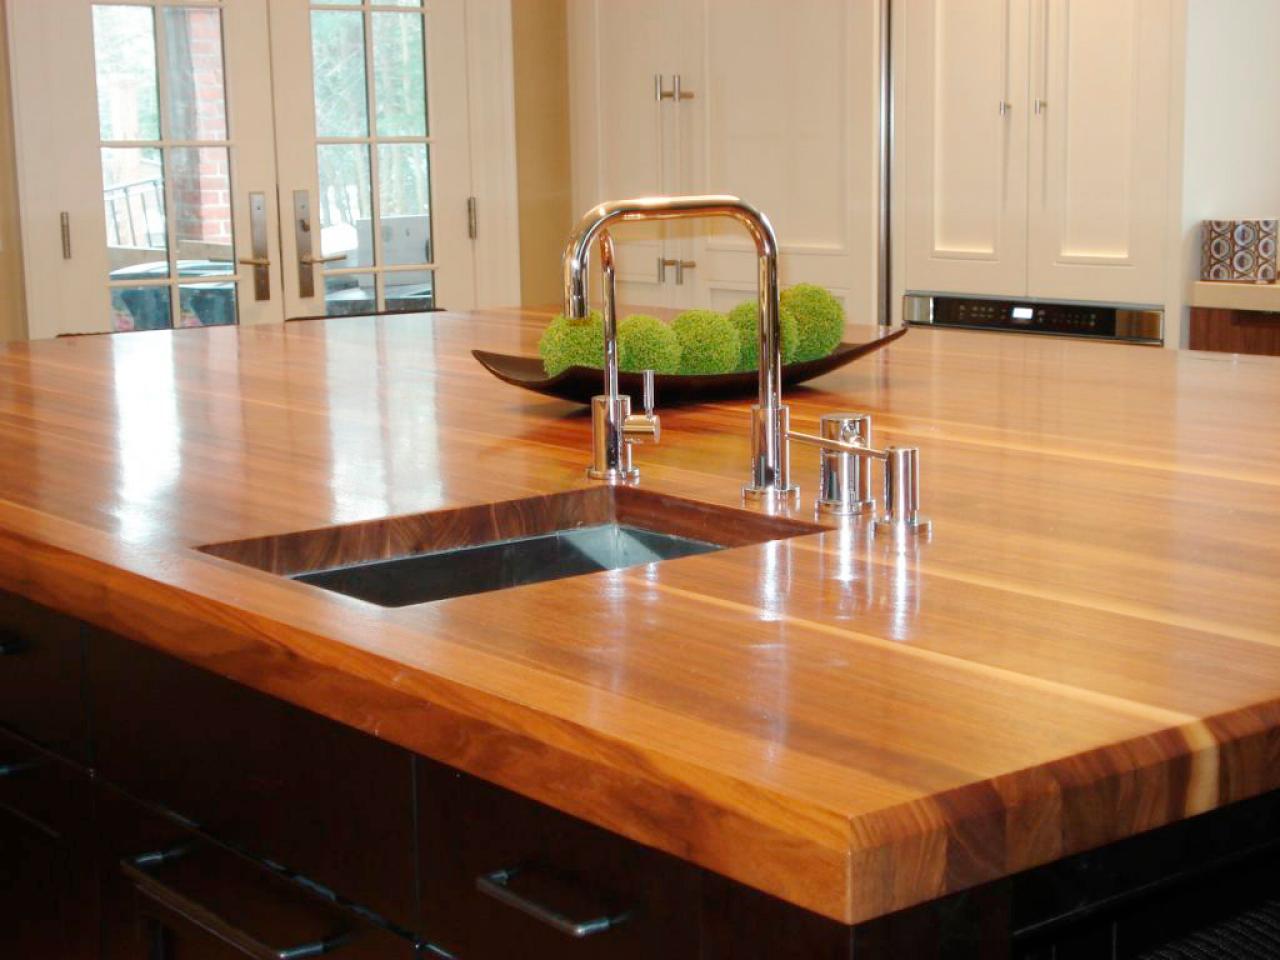 Butcher Block And Wood Countertops, How Long Do Butcher Block Countertops Last